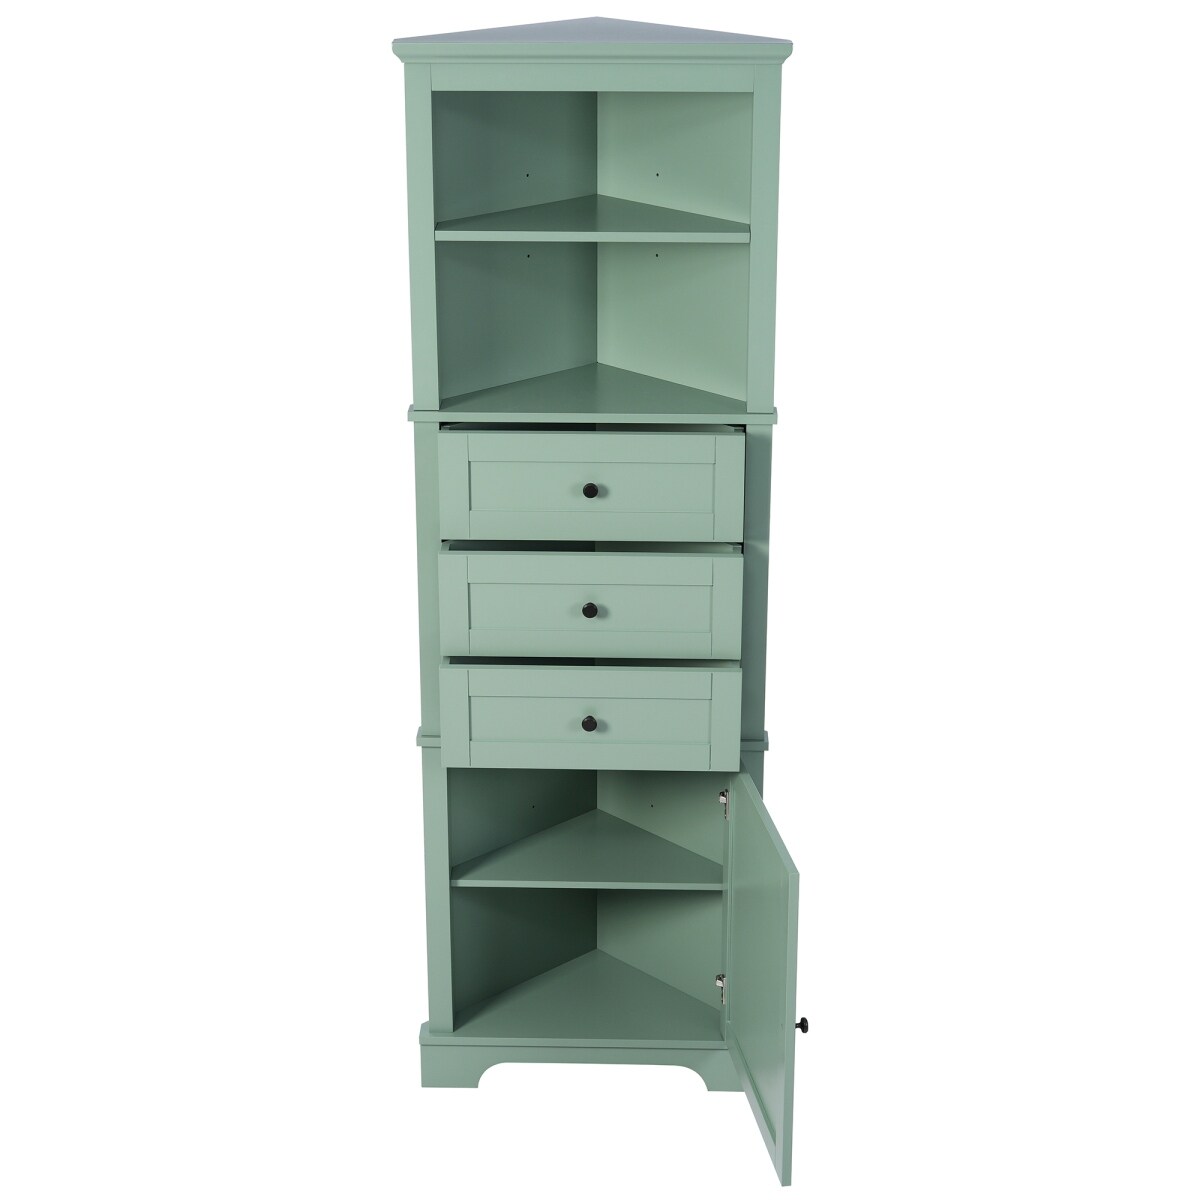 https://ak1.ostkcdn.com/images/products/is/images/direct/c212aee21c4e42694fbbe25fe2e2f32c5e5848da/Triangle-Corner-Cabinet-with-3-Drawers-and-Adjustable-Shelves%2C-Modern-Bathroom-Cabinet%2C-Floor-Cabinet.jpg